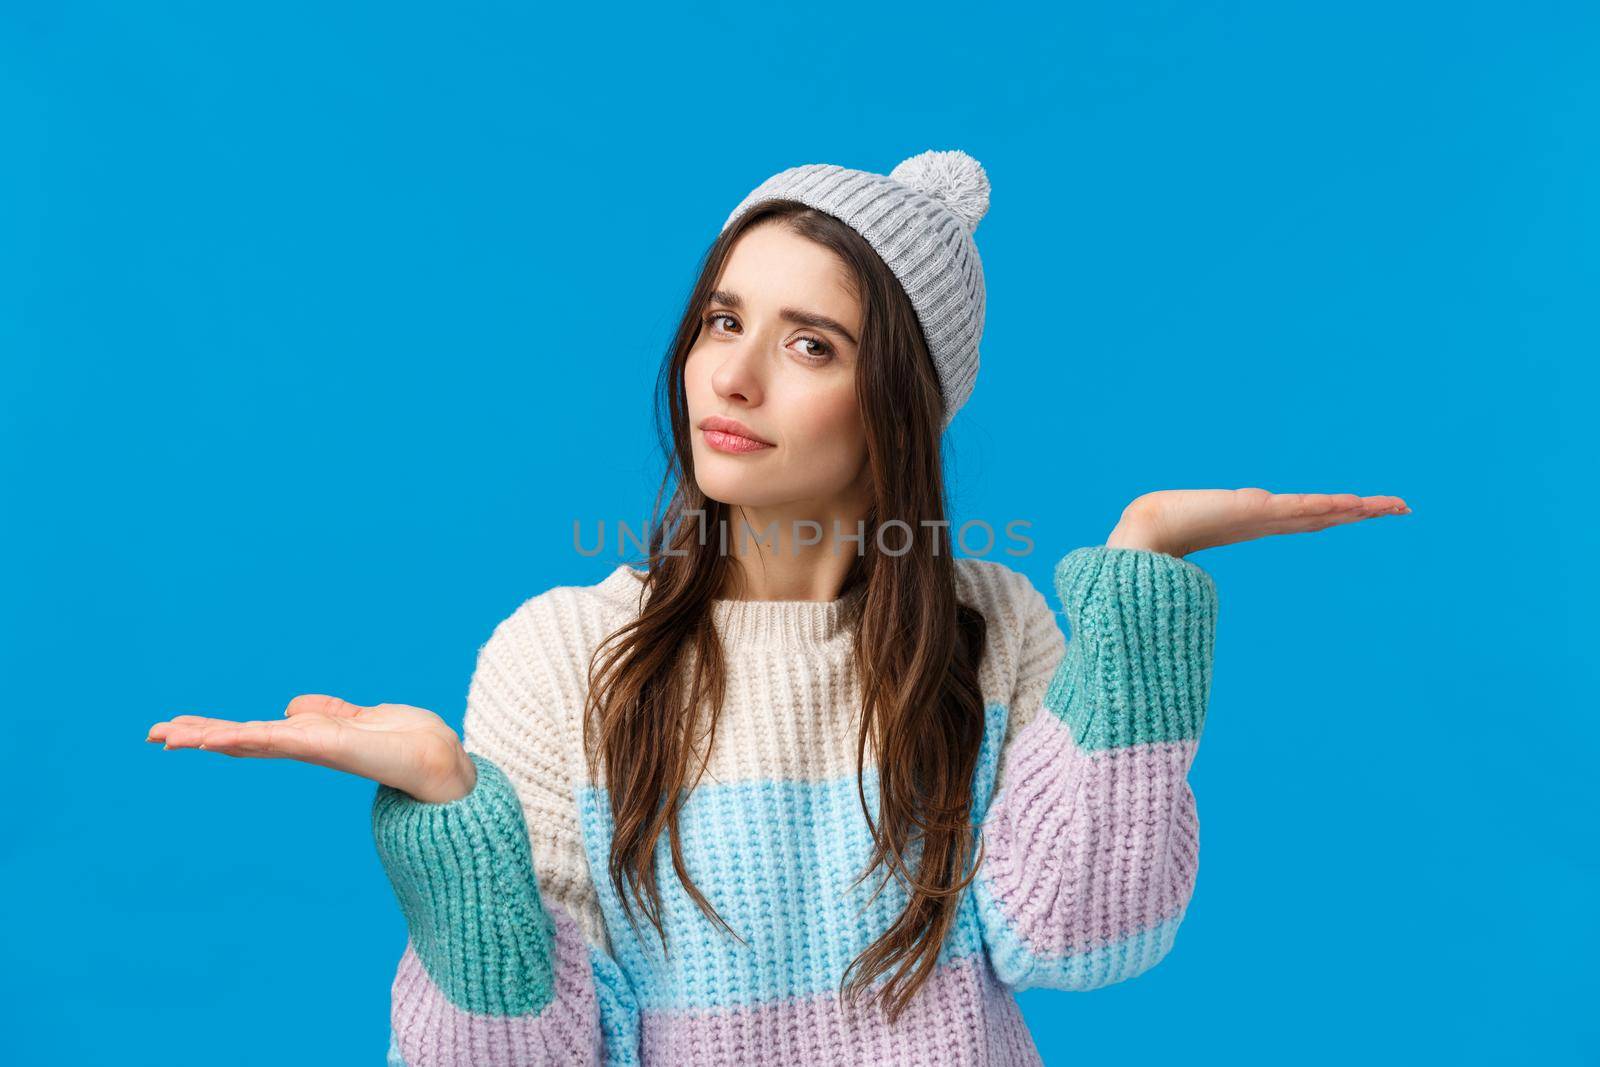 Girl troubled make choice, finally decided what buy, holding hands raised like weighing products, looking camera thoughtful, indecisive, asking help with picking winter holidays gift, blue background.